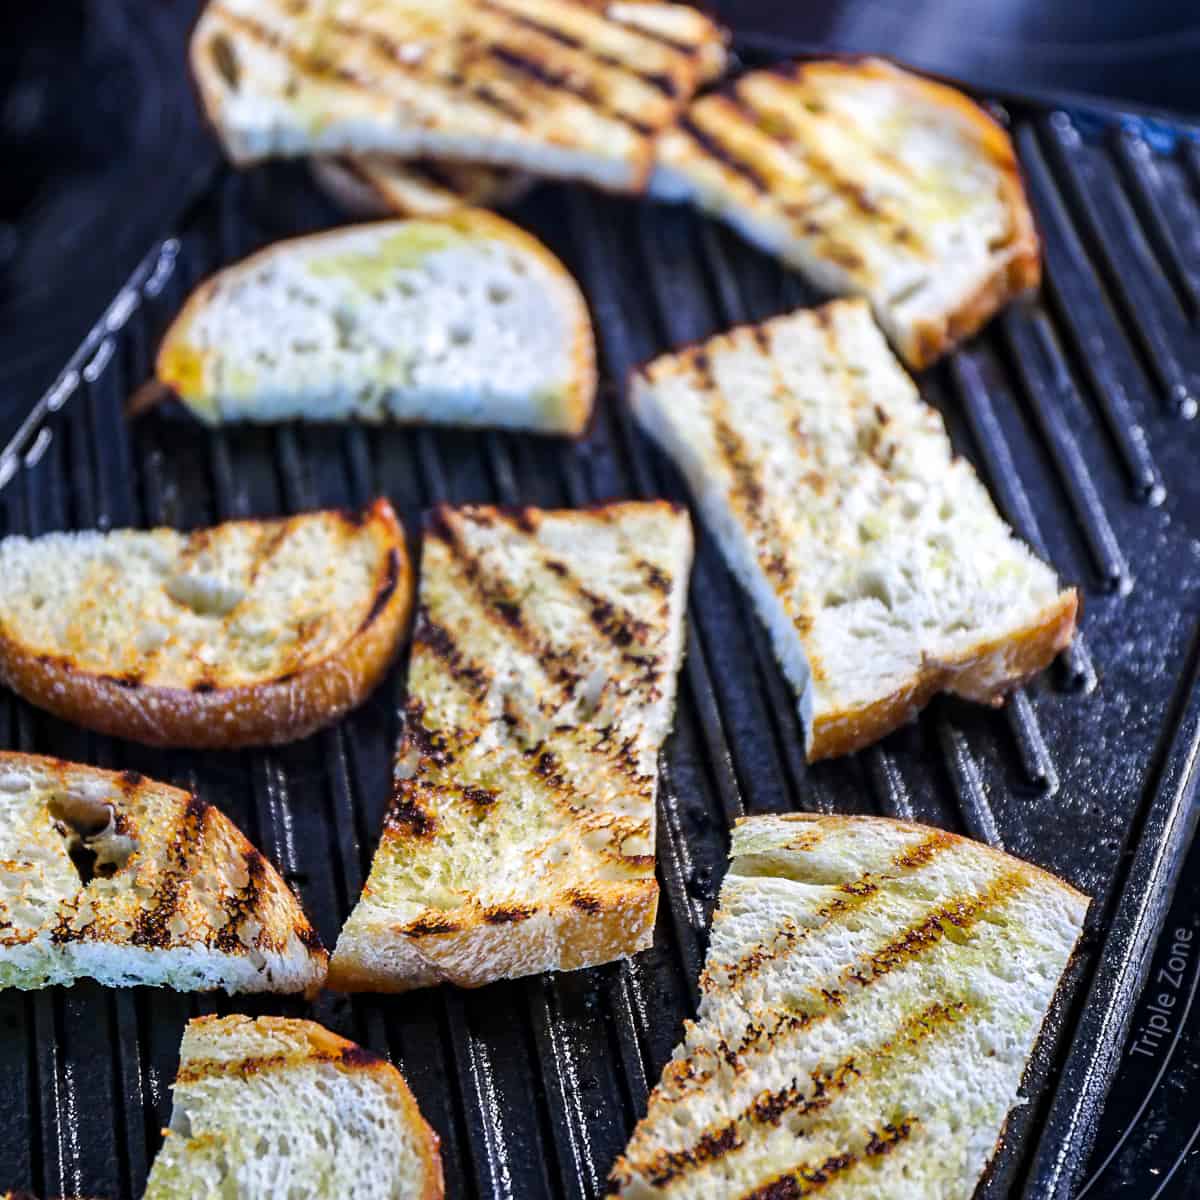 https://sipbitego.com/wp-content/uploads/2021/07/How-To-Toast-Bread-In-Pan-Grill-Pan-Crostini-Sip-Bite-Go-feature.jpg